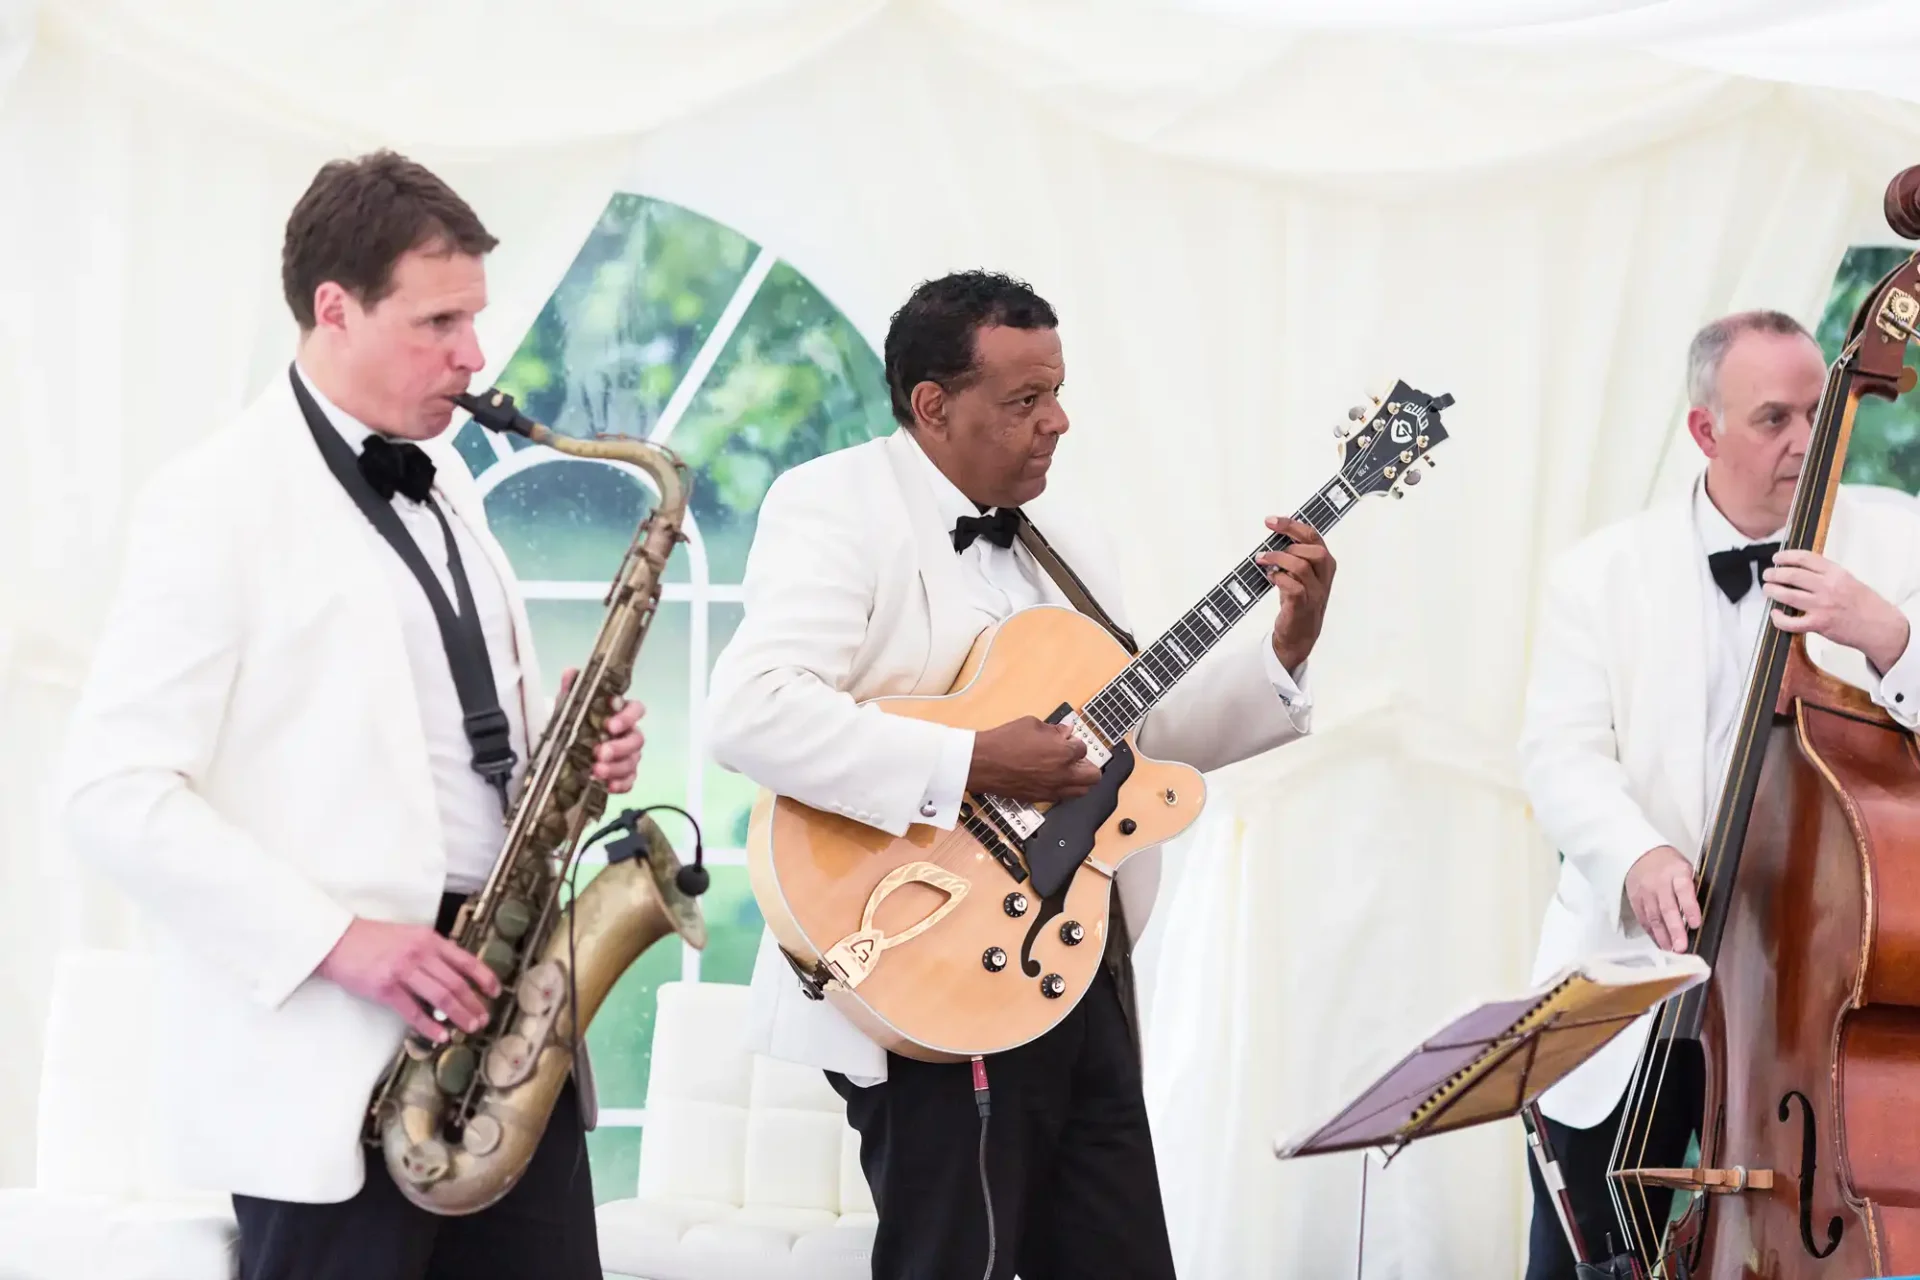 Three musicians in formal attire perform at an event, playing a saxophone, electric guitar, and double bass under a white tent.